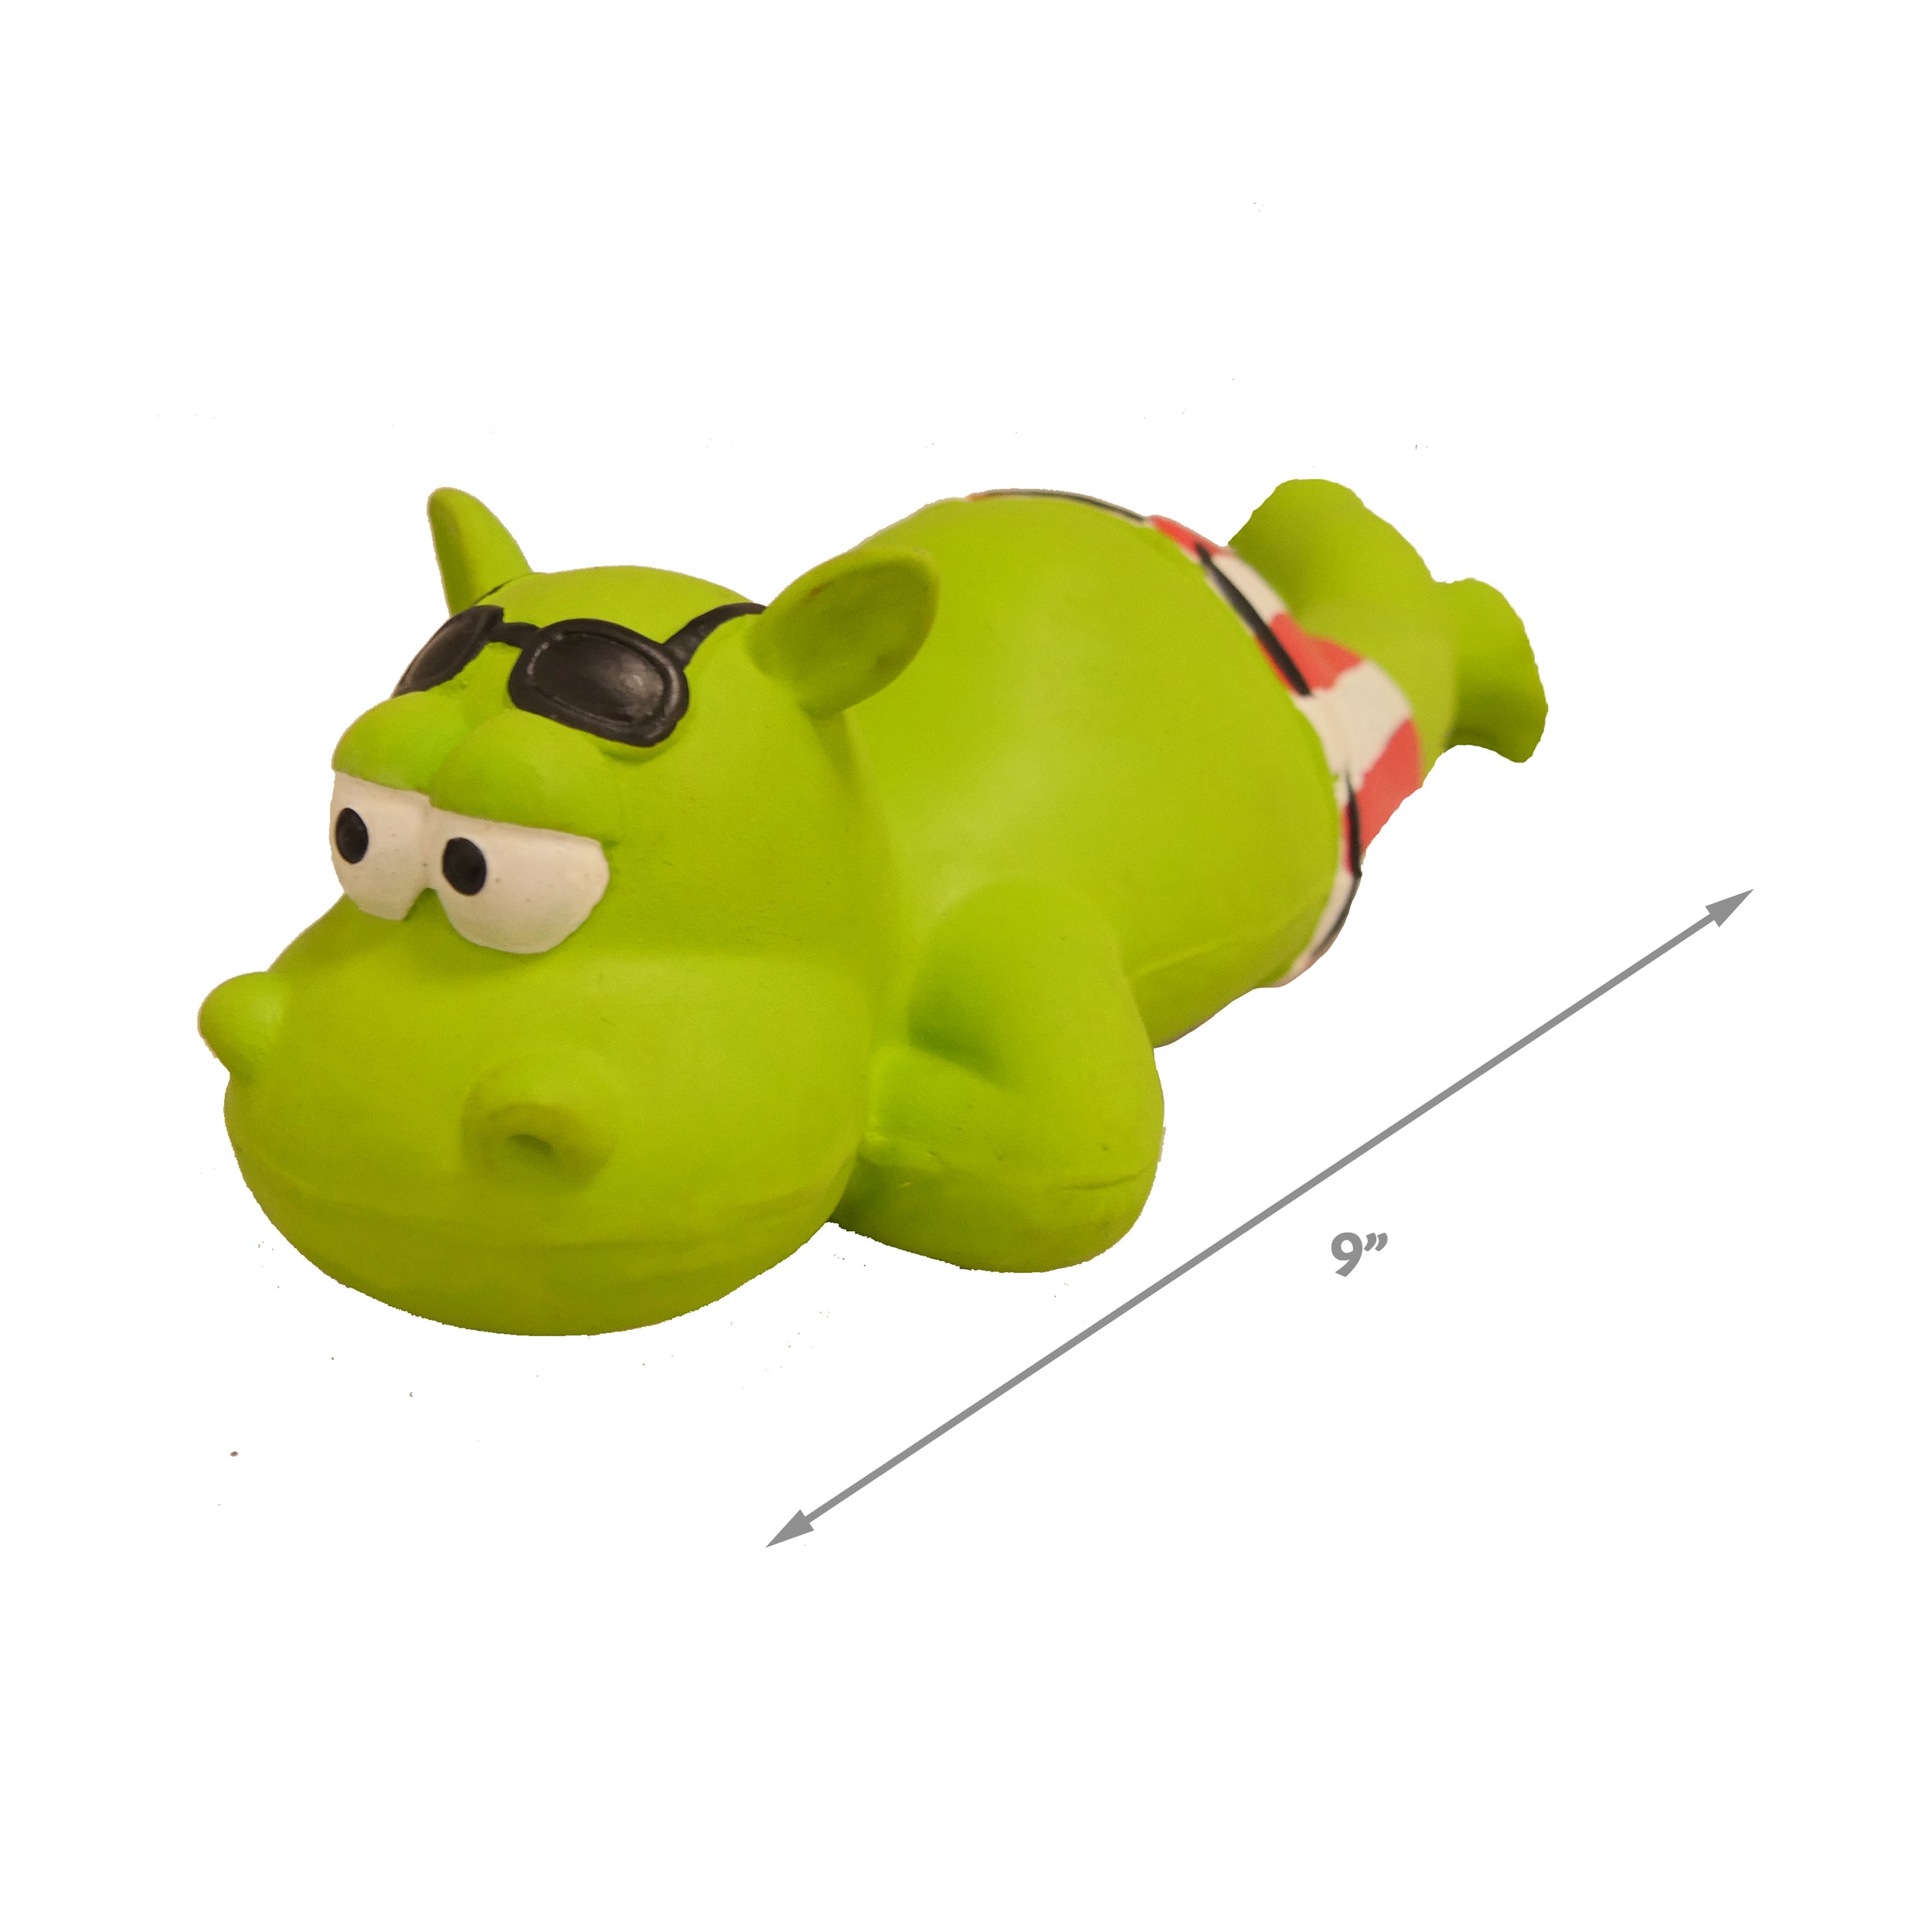 [Dog toy] green rubber hippo toy in swim trunk